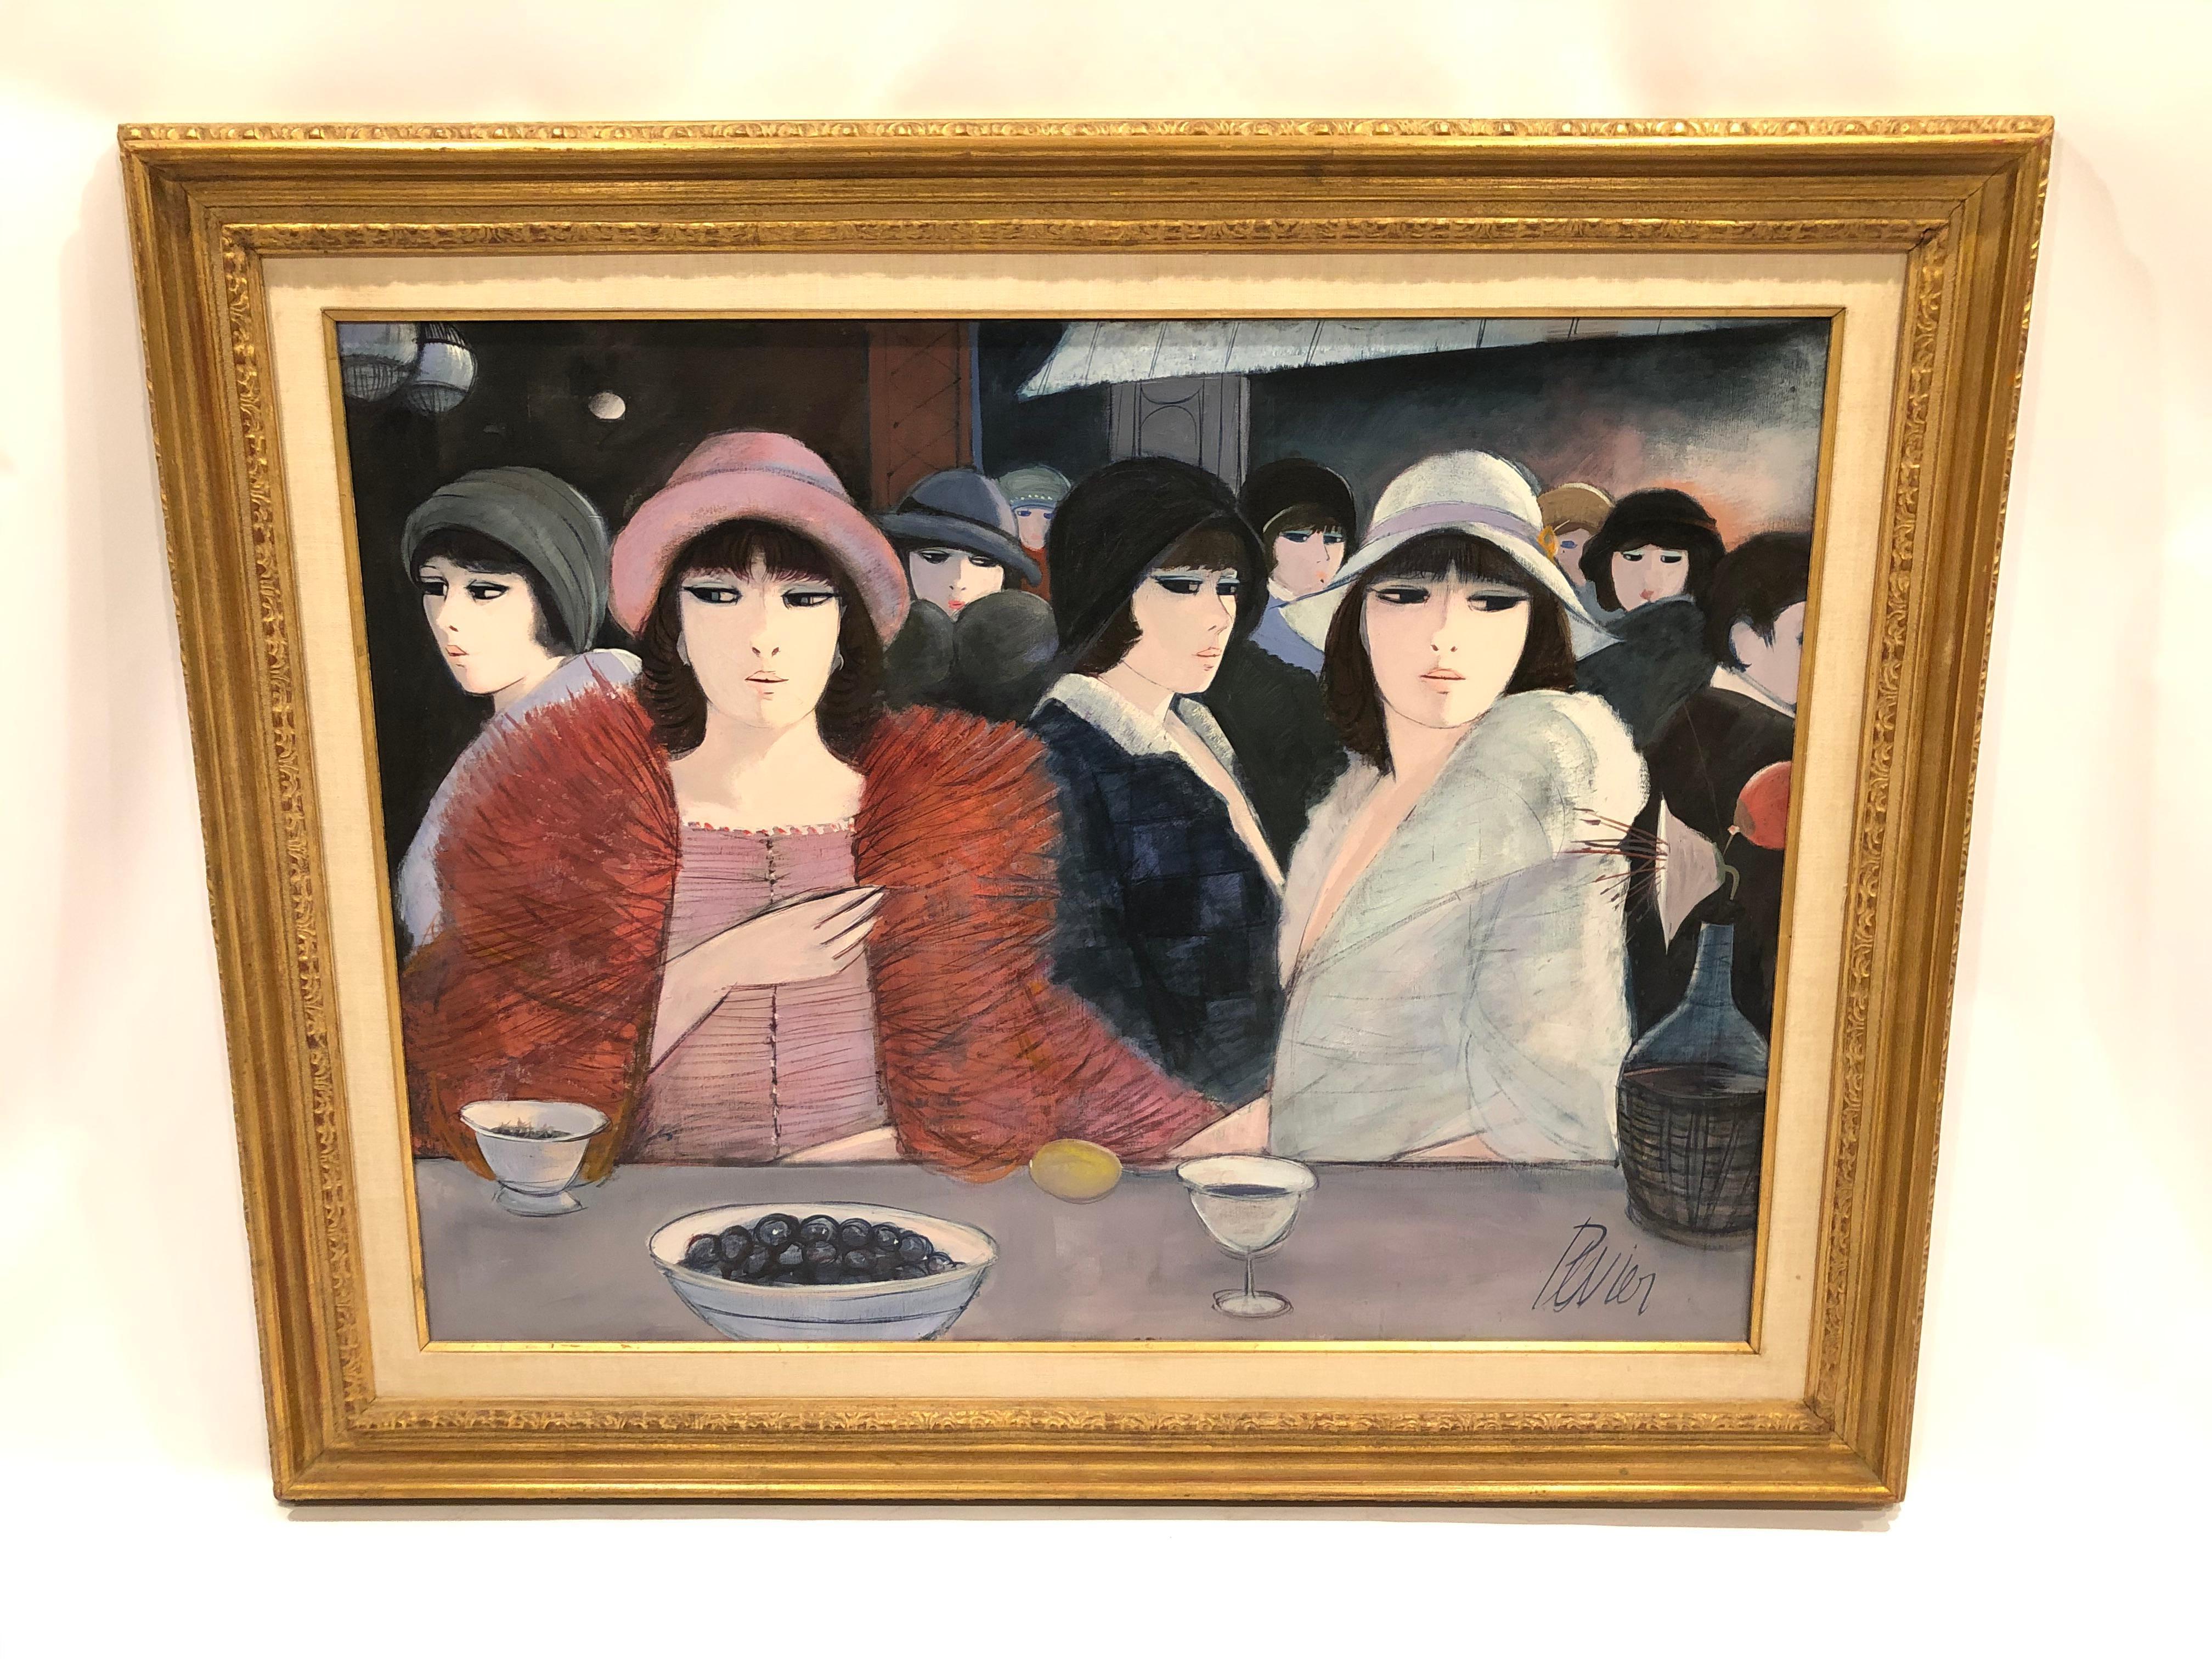 Charles Levier was born in 1920 in Corsica France and died in 2003. This incredible large painting is emblematic of his famous recognizable stylized female figures with hollow almost Asian eyes and modern cubist sensibility. He is known as a mid